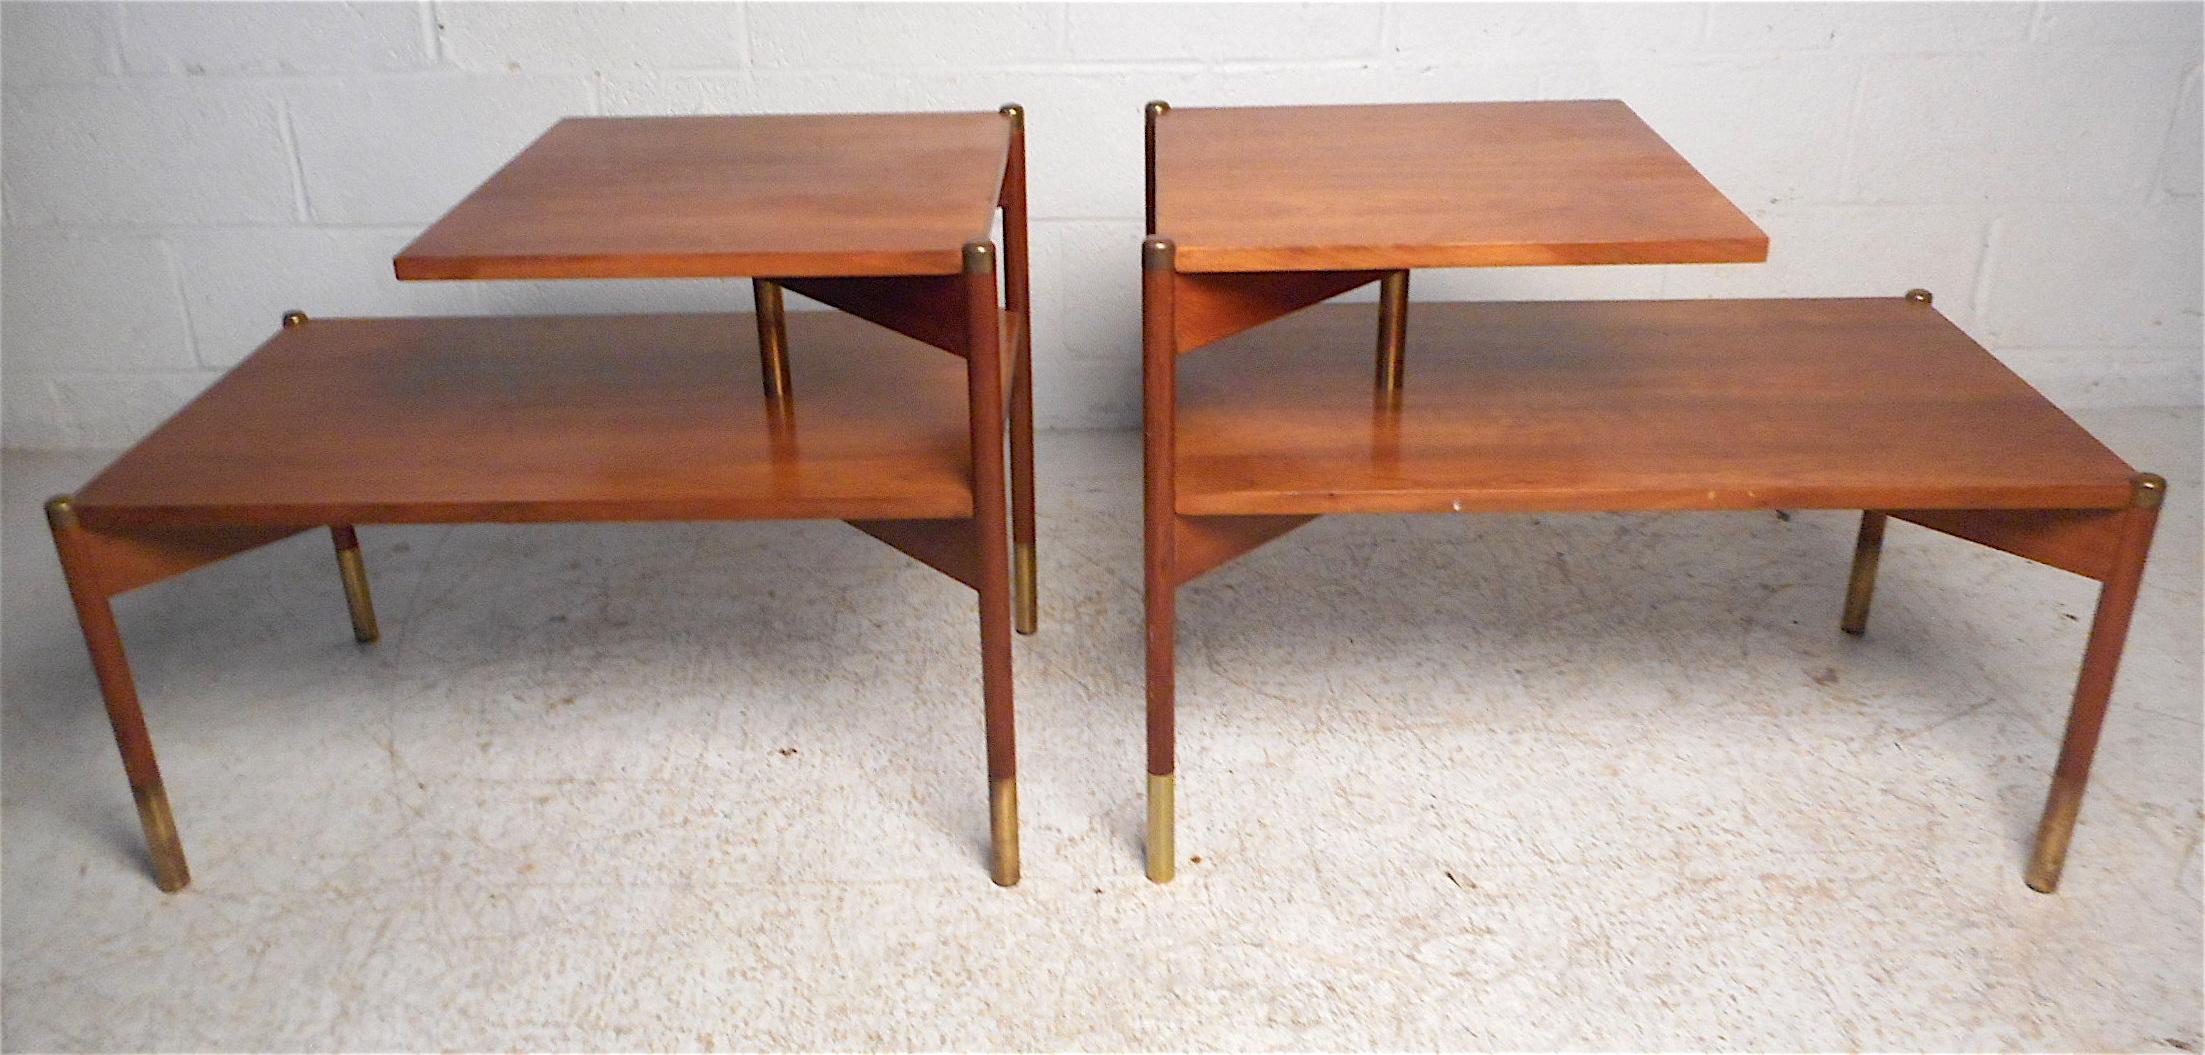 two tier side table